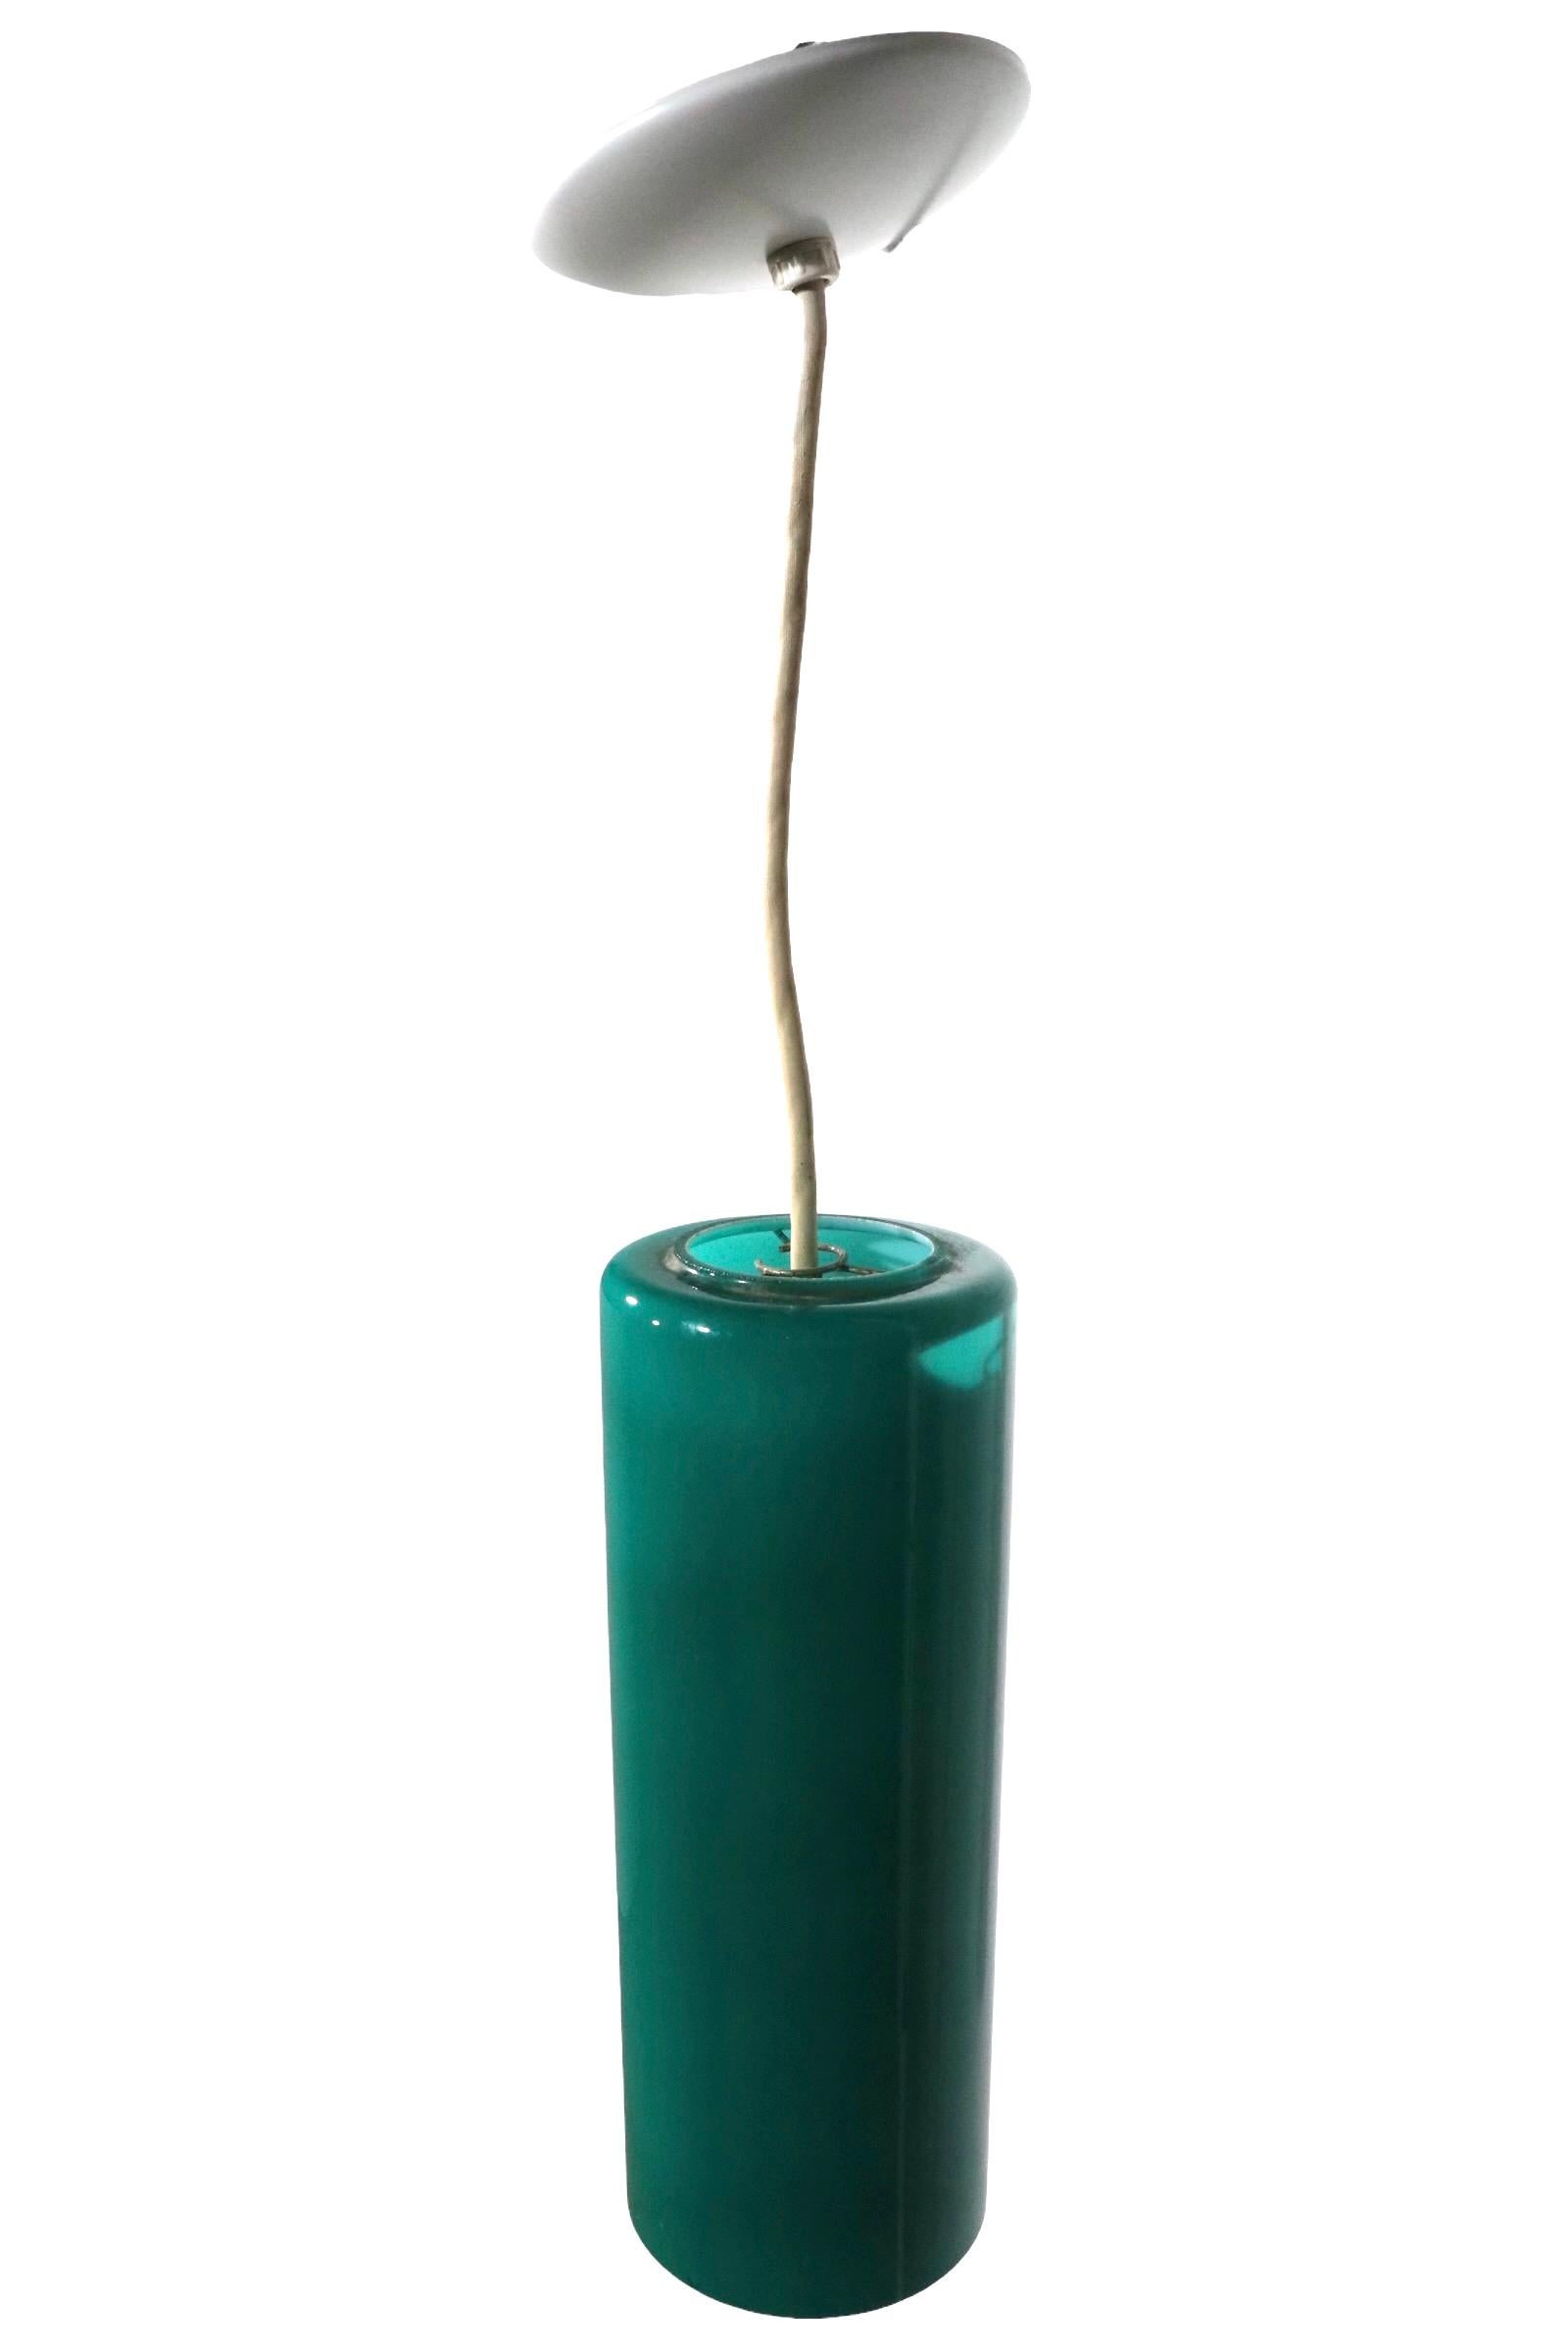 American Prescolite Cylinder Pendant Chandelier in Green Glass, C 1950 - 1970's For Sale